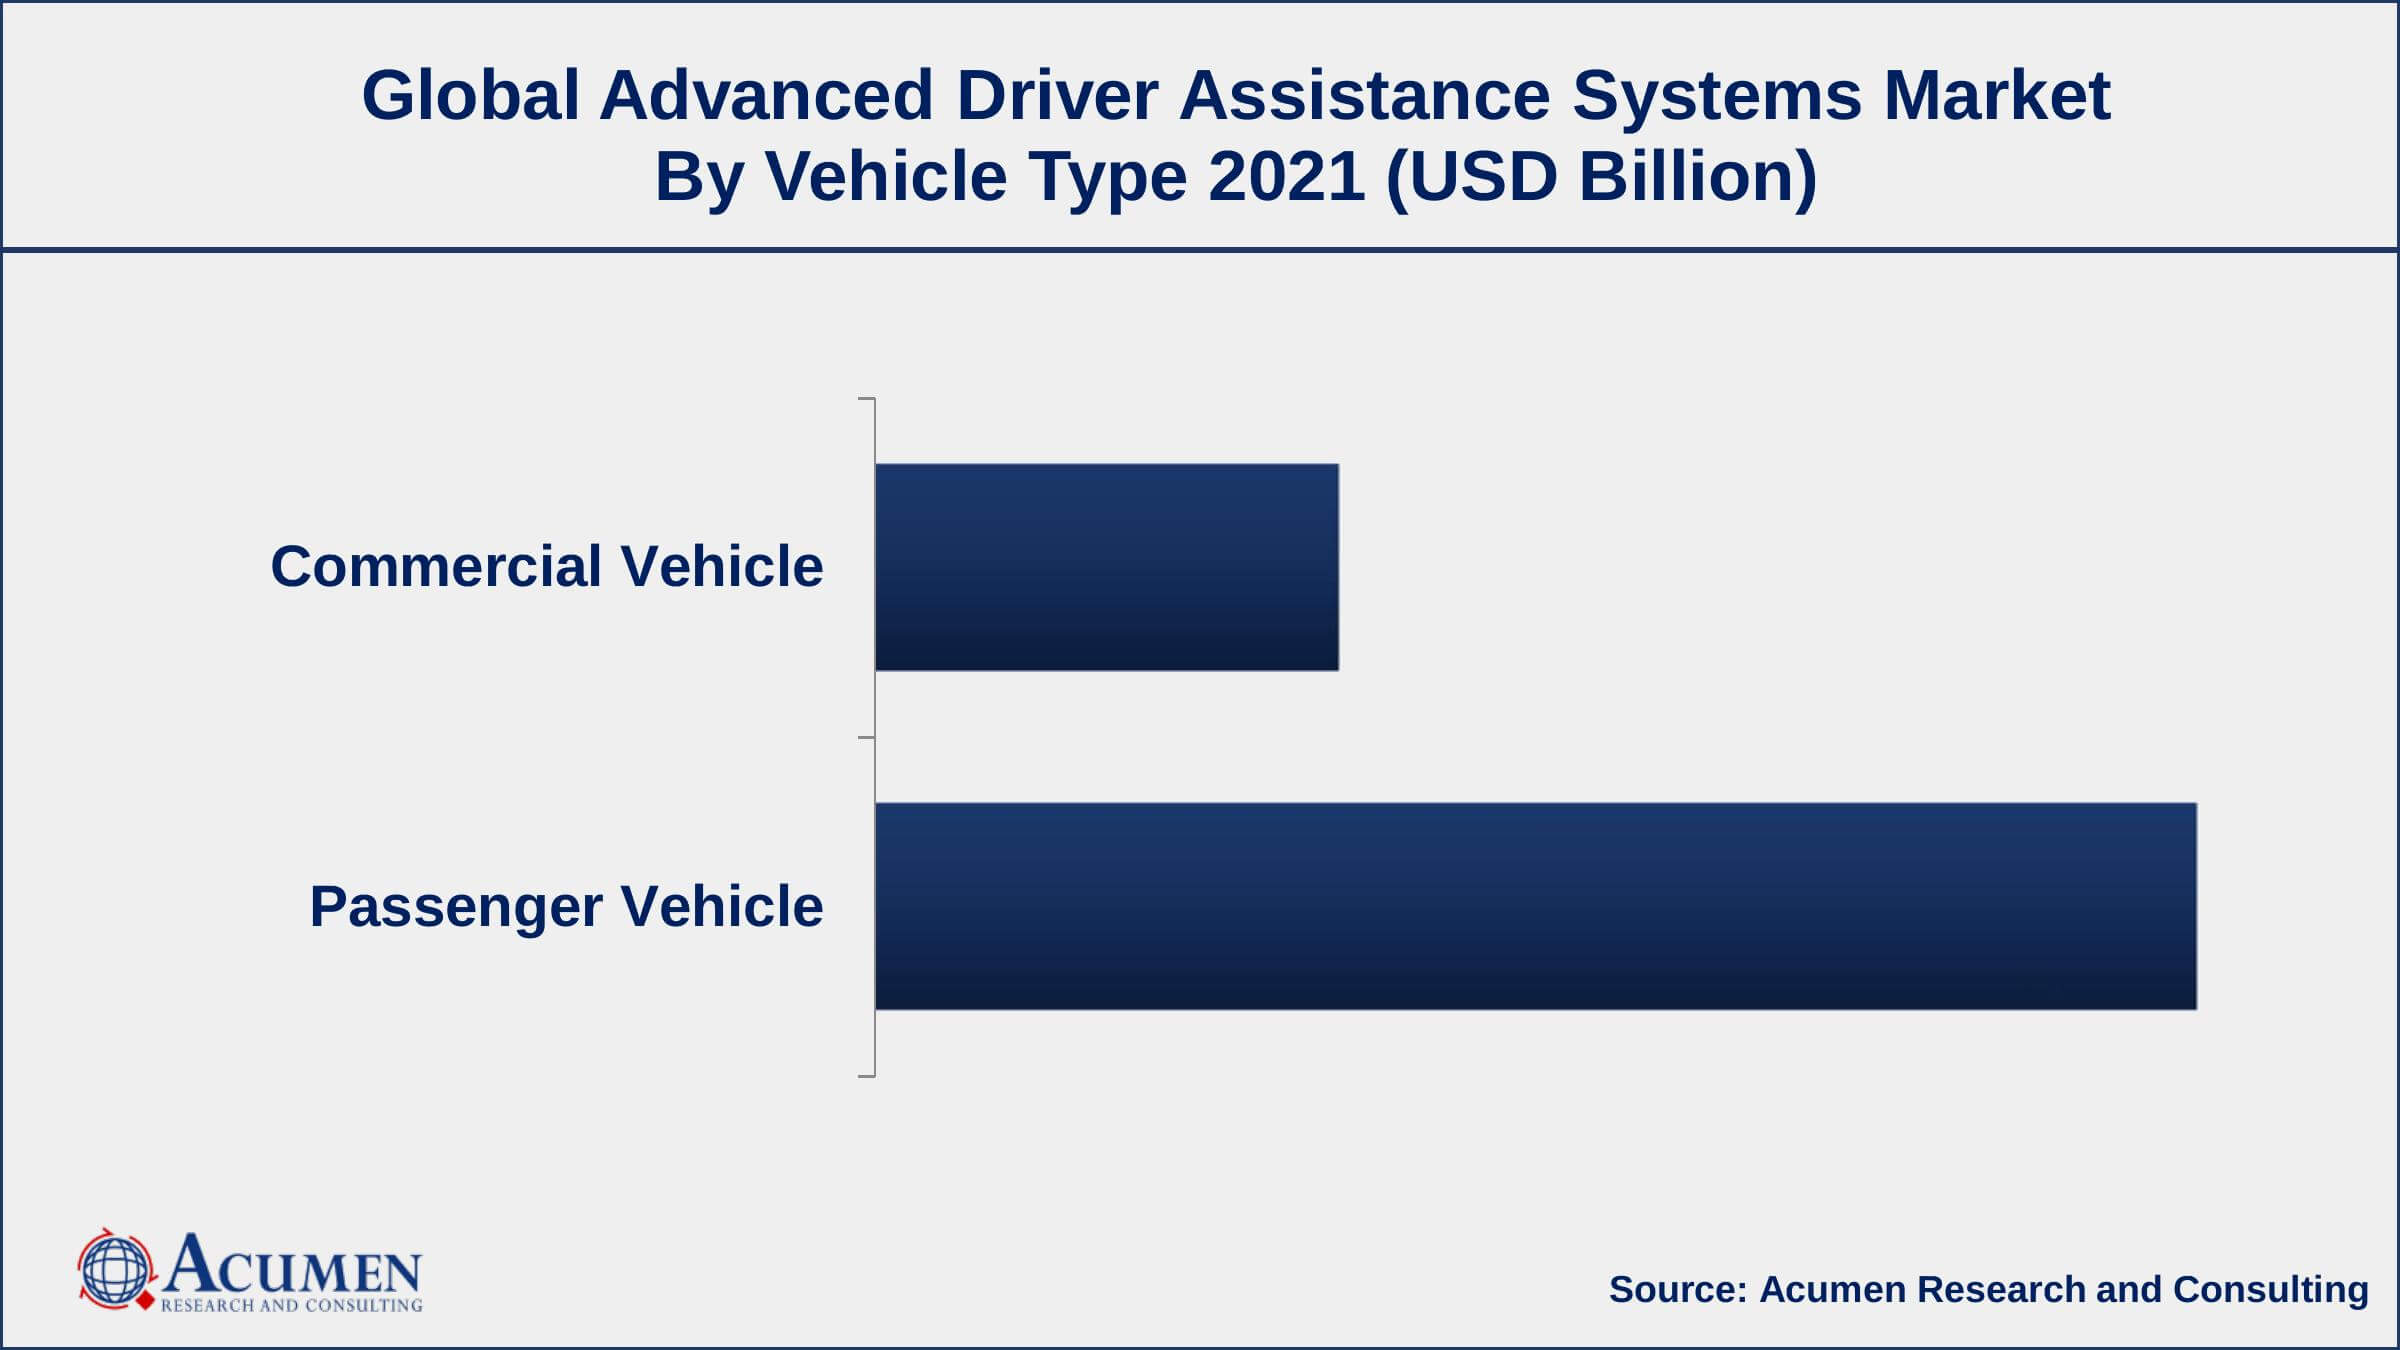 By vehicle type, passenger vehicle segment engaged more than 72% of the total market share in 2021